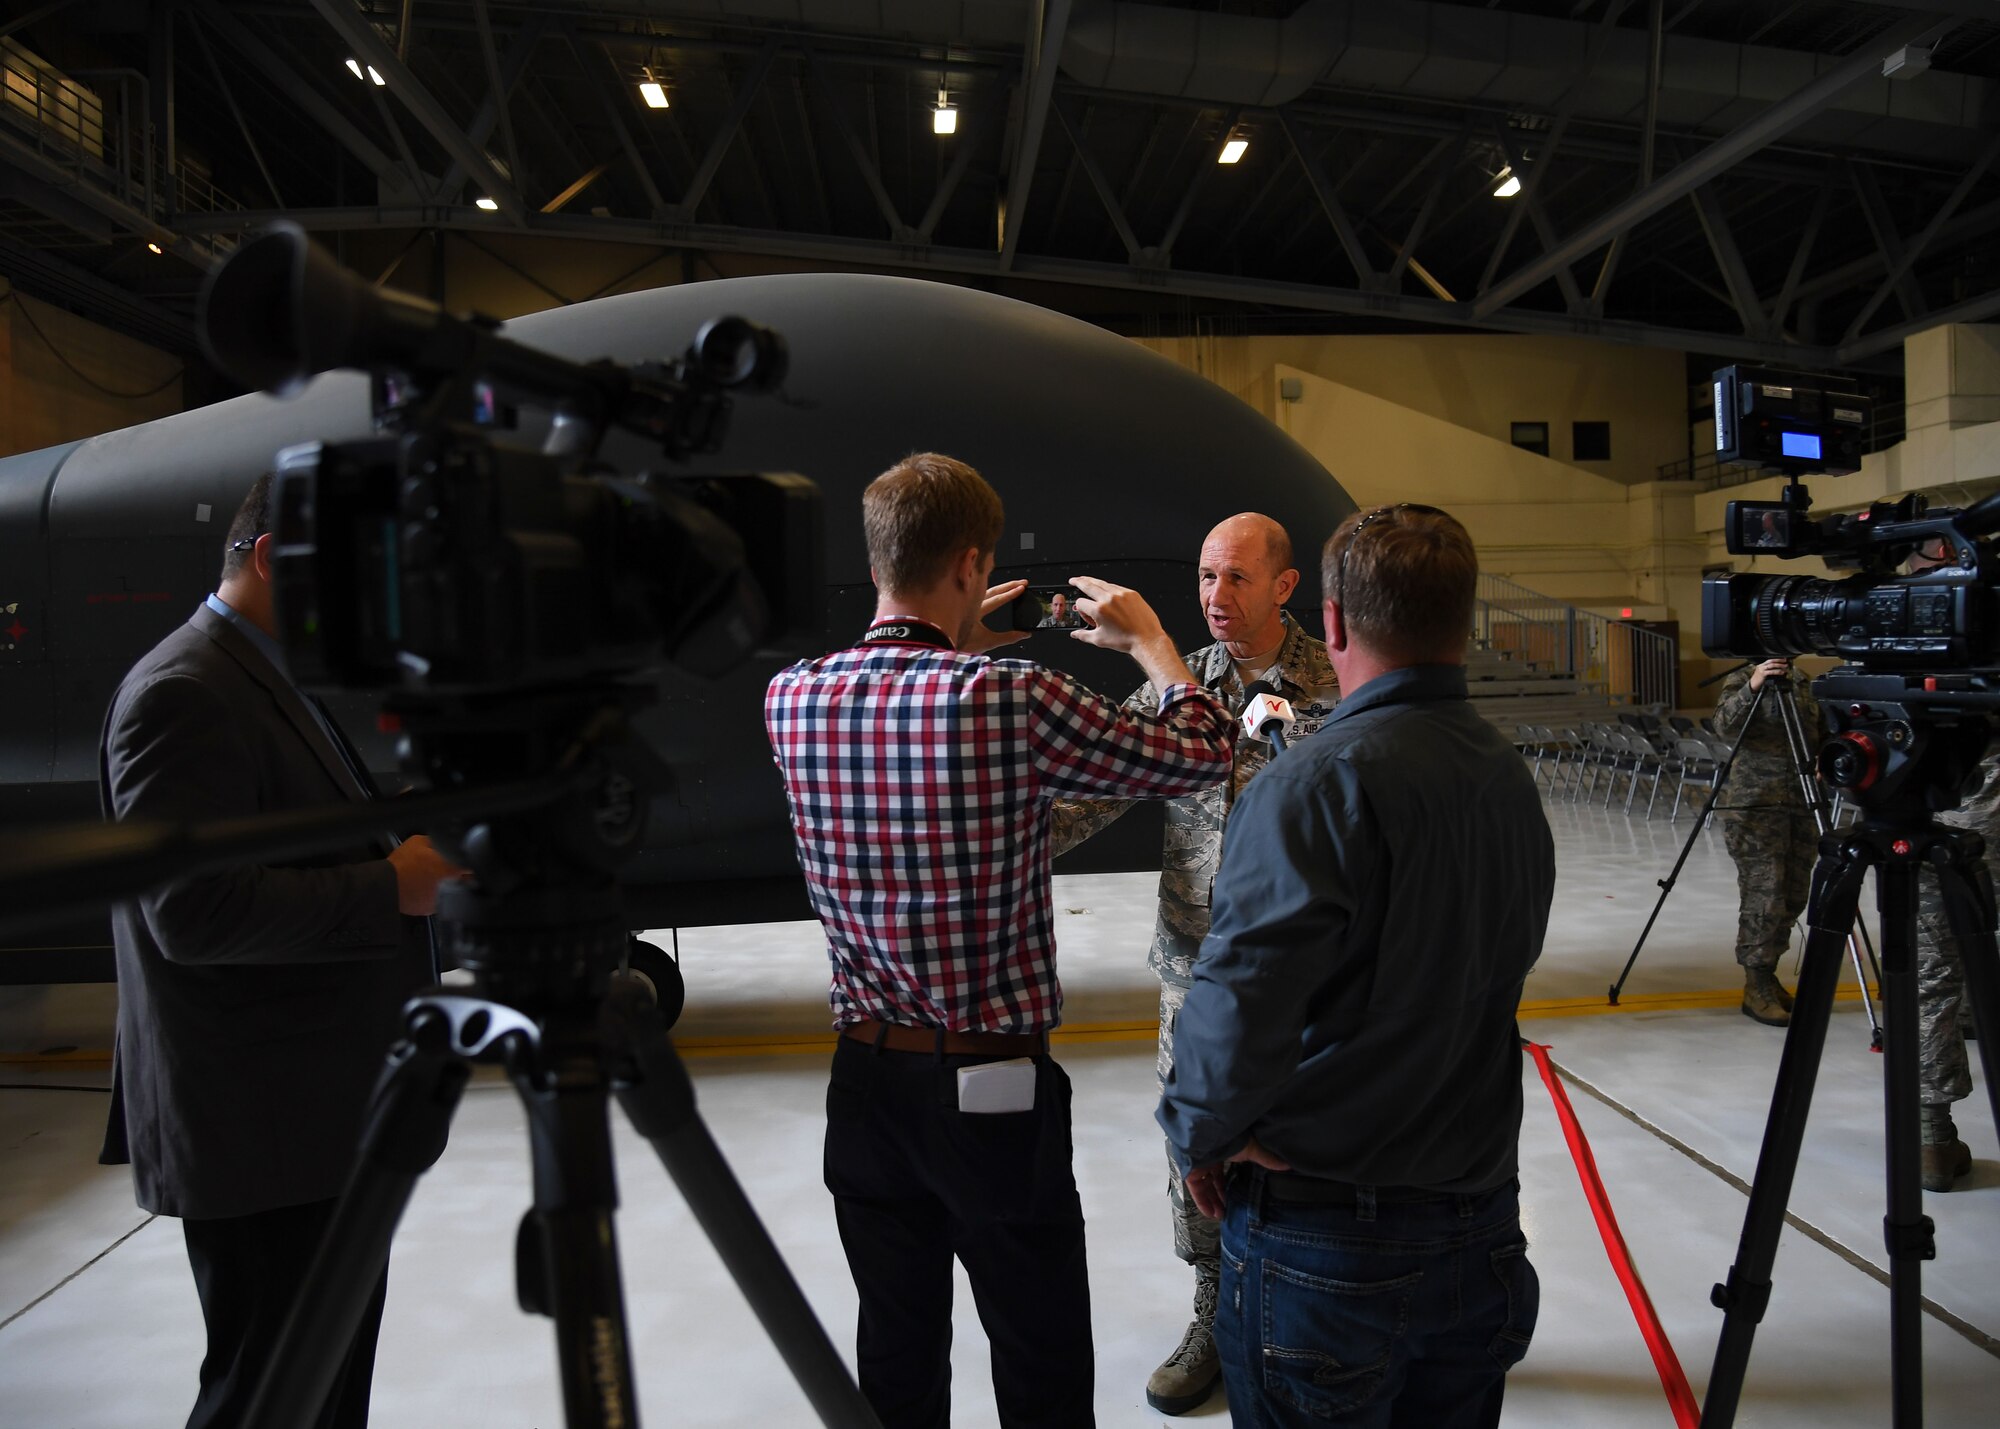 Gen. Mike Holmes, Air Combat Control commander, speaks during an interview with a local news channel, WDAZ News, after a realignment ceremony at Grand Forks Air Force Base, N.D., June 15, 2017. The ceremony marked the first official day of the 319th Air Base Wing’s transition from Air Mobility Command to Air Combat Command. (U.S. Air Force photo by Airman 1st Class Elora McCutcheon)